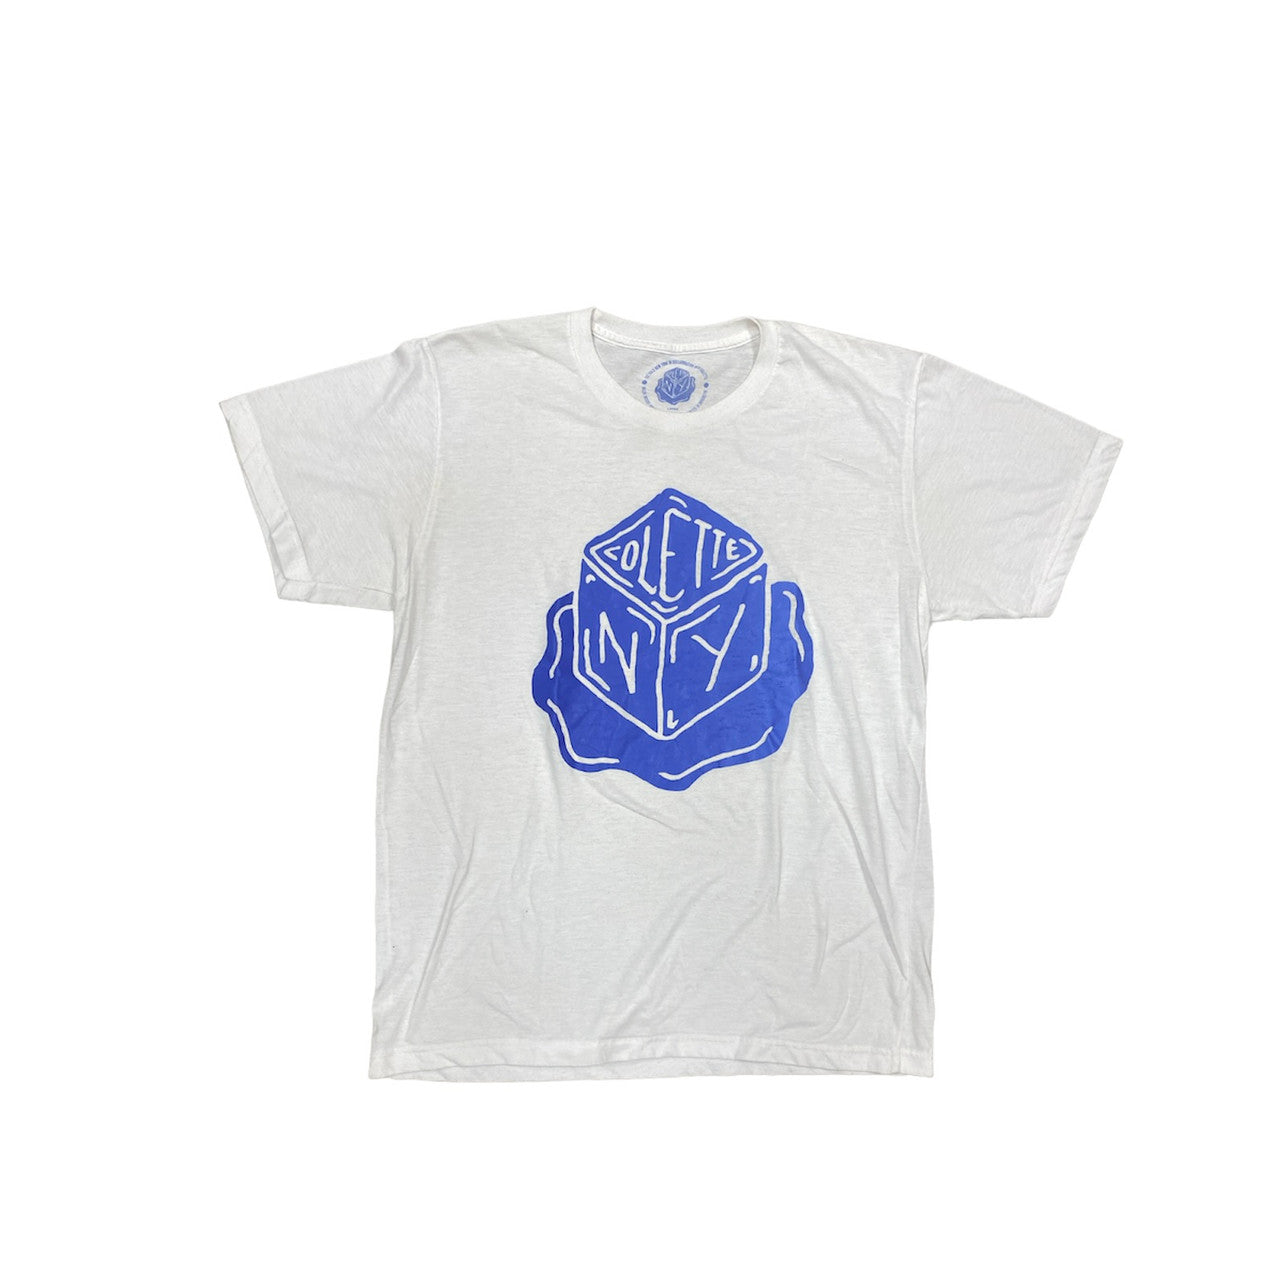 Ice Cold NY x Colette Tshirt